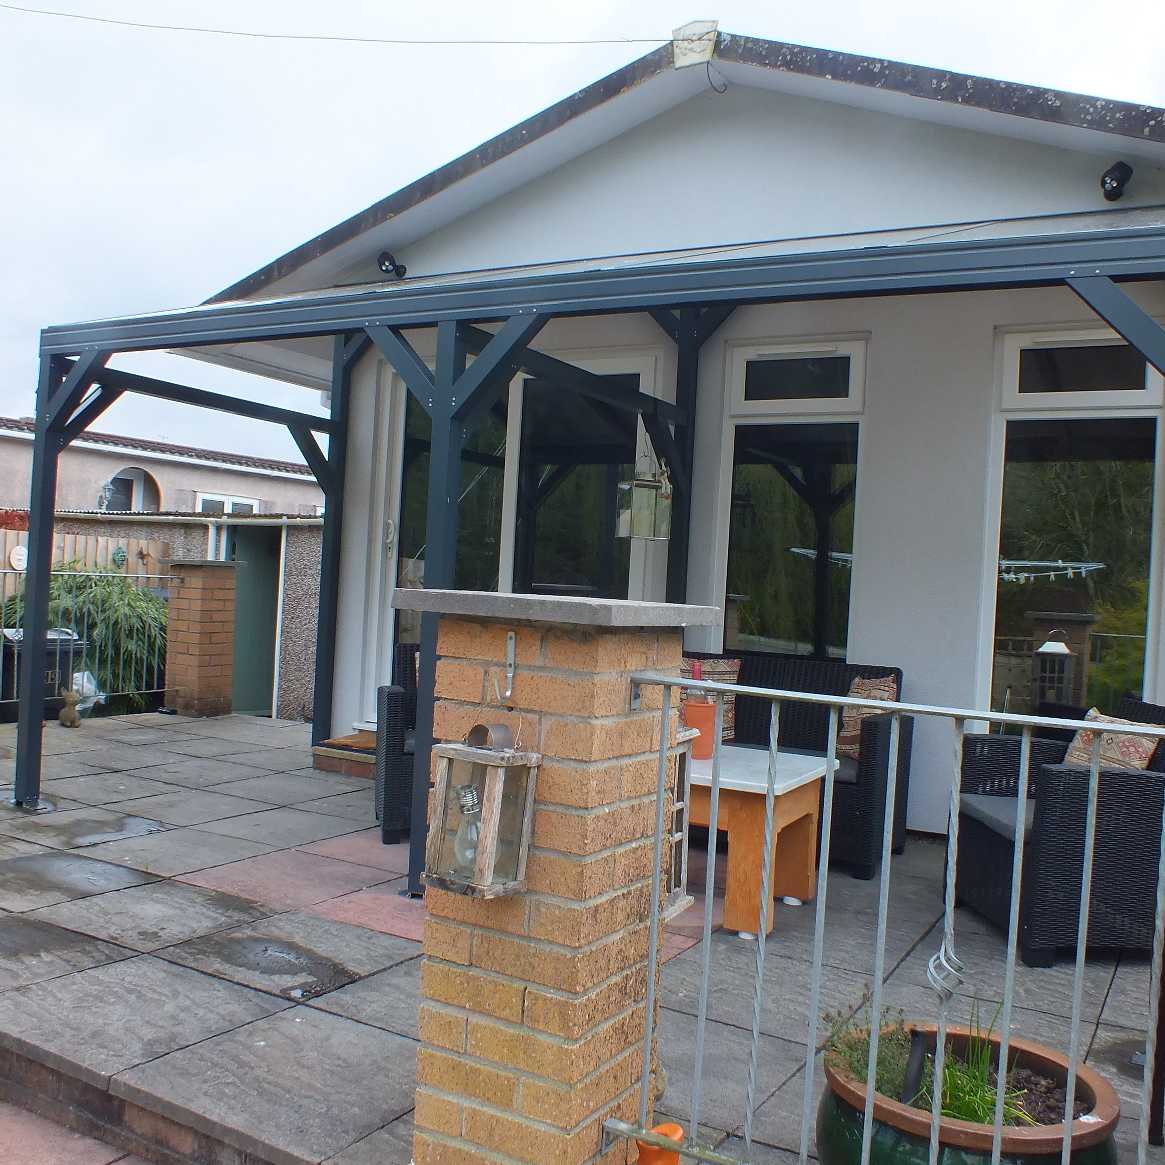 Buy Omega Smart Free-Standing, Anthracite Grey MonoPitch Roof Canopy with 16mm Polycarbonate Glazing - 4.2m (W) x 3.0m (P), (6) Supporting Posts online today